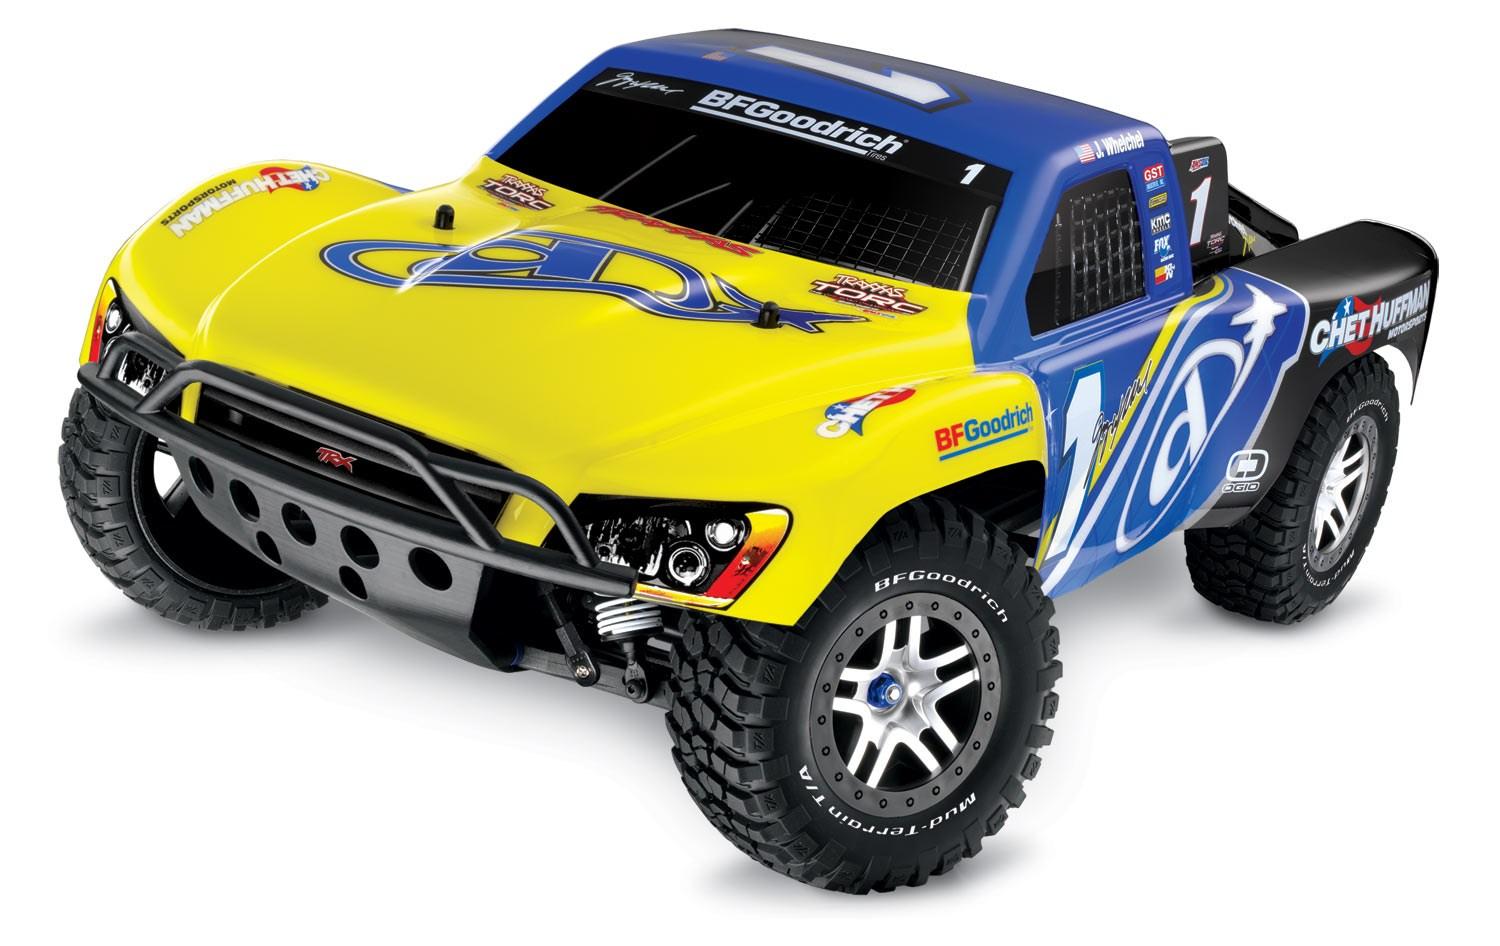 Foto Traxxas 6807 Slash Ultimate VXL Brushless 4WD 2.4GHz RTR modelismo coches rc (amarillo)